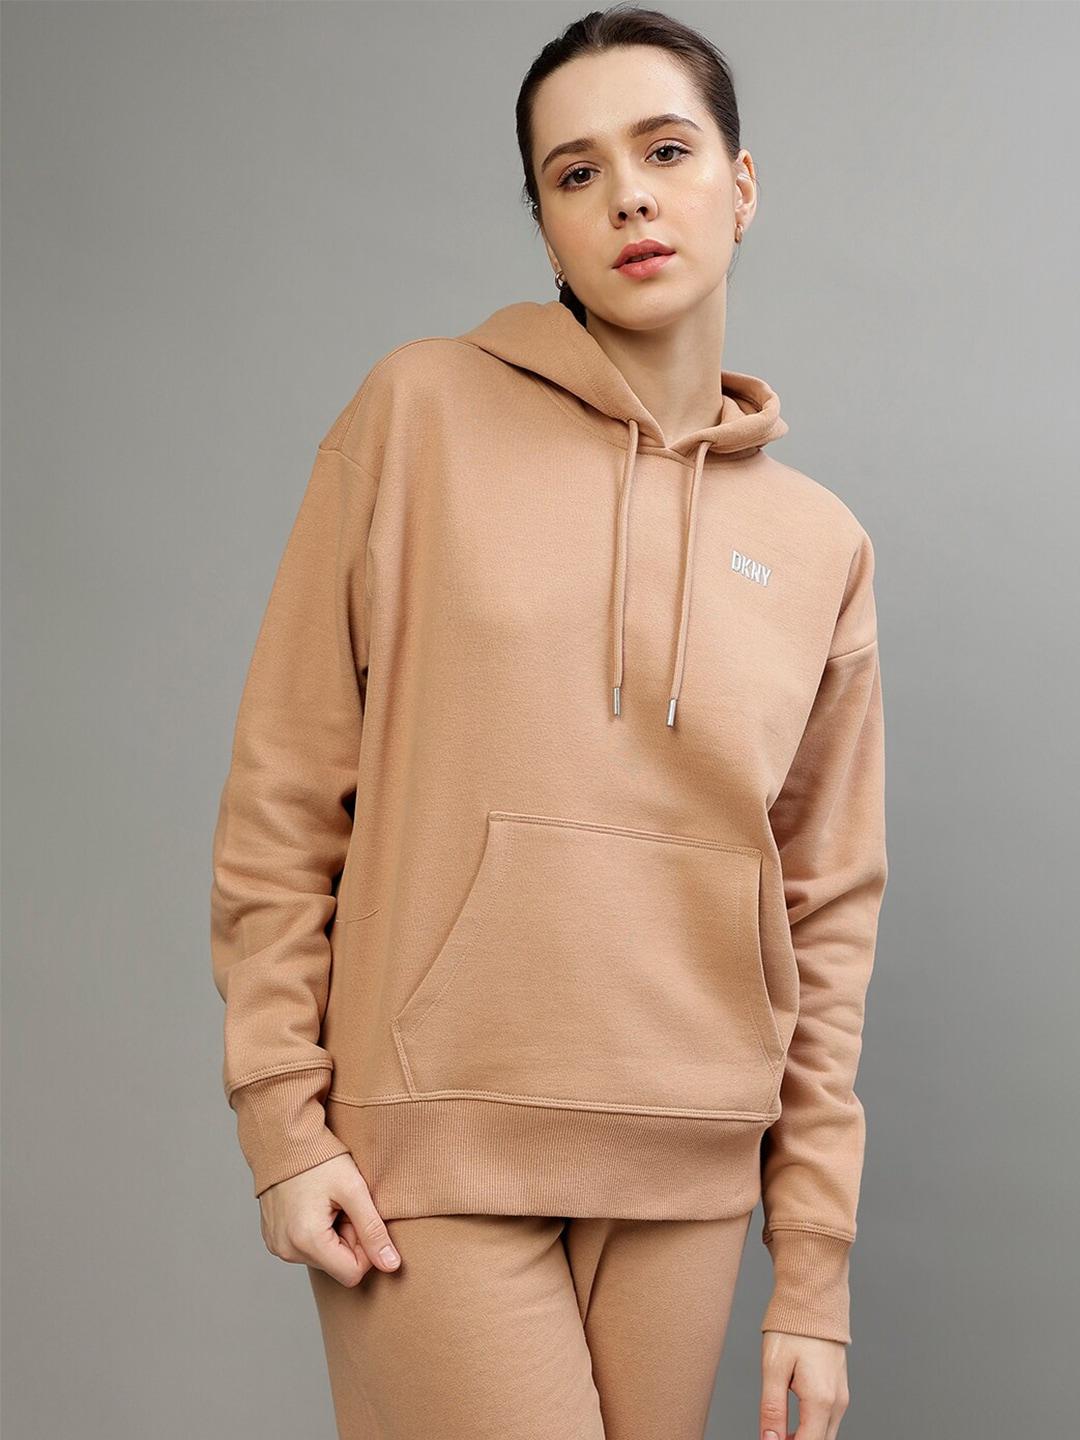 DKNY Long Sleeves Hooded Pullover